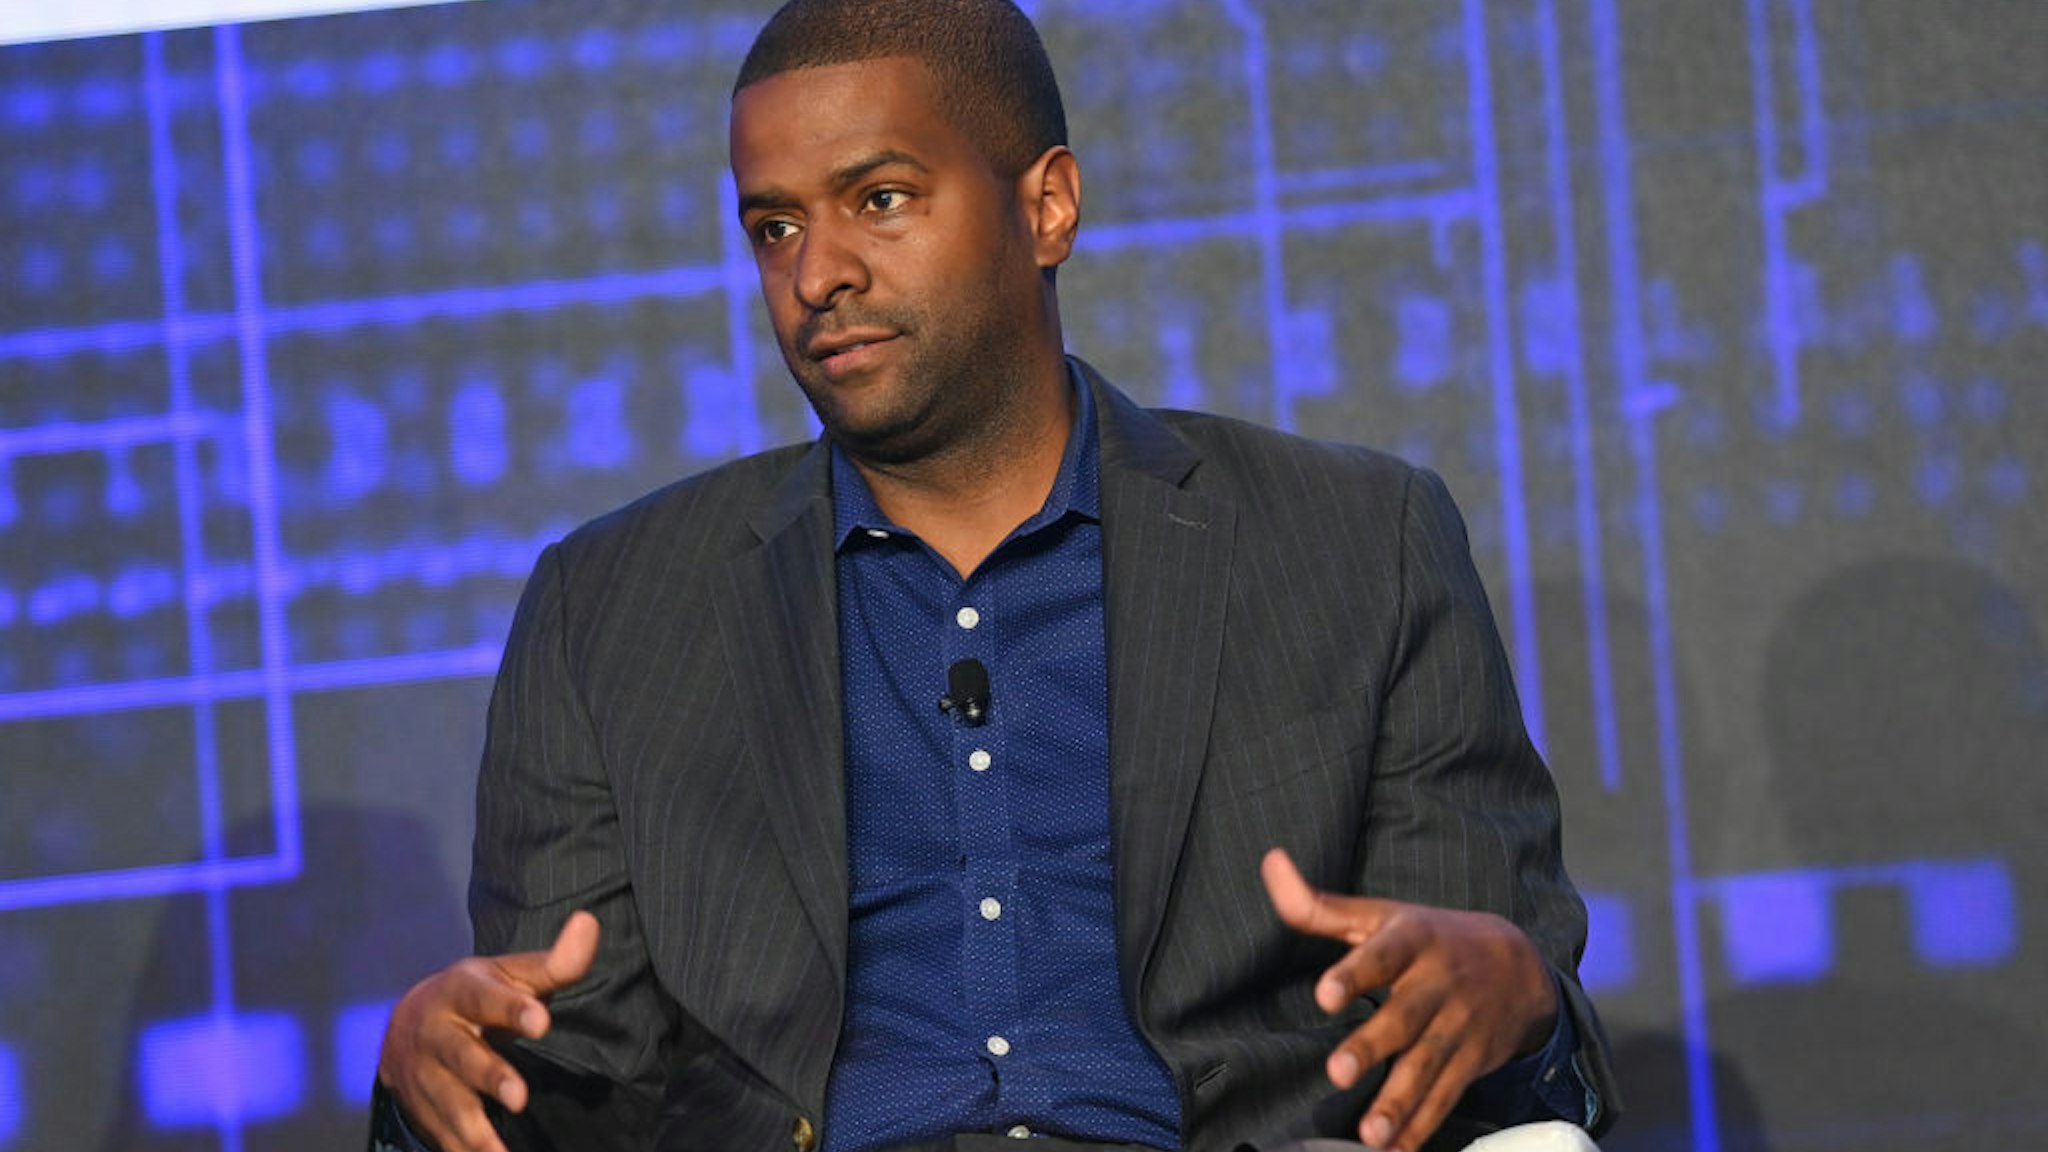 ATLANTA, GEORGIA - MAY 20: Bakari Sellers speaks onstage during the HOPE Global Forums Cryptocurrency and Digital Assets Summit at Atlanta Marriott Marquis on May 20, 2022 in Atlanta, Georgia. (Photo by Paras Griffin/Getty Images for Operation Hope)